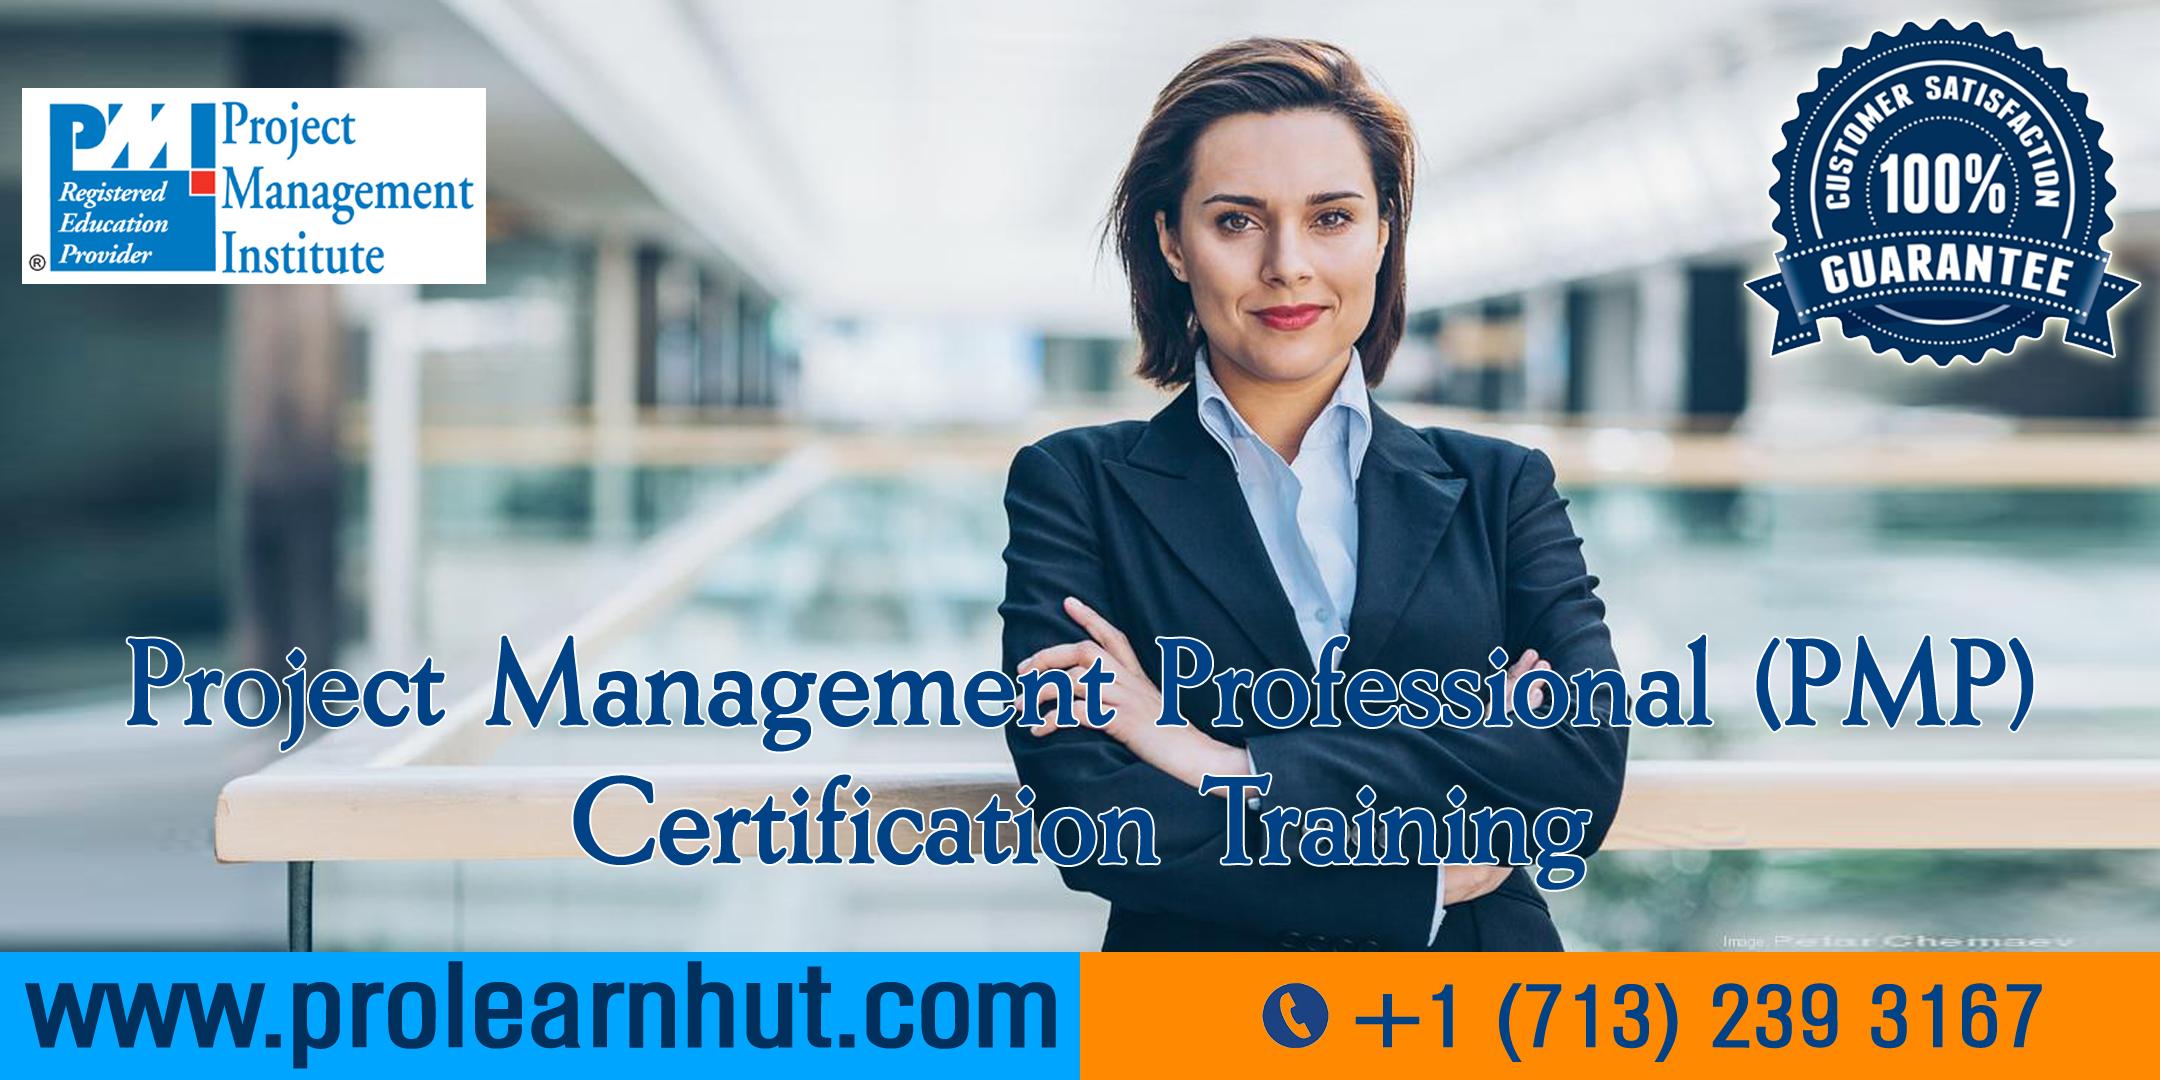 PMP Certification | Project Management Certification| PMP Training in Carrollton, TX | ProLearnHut